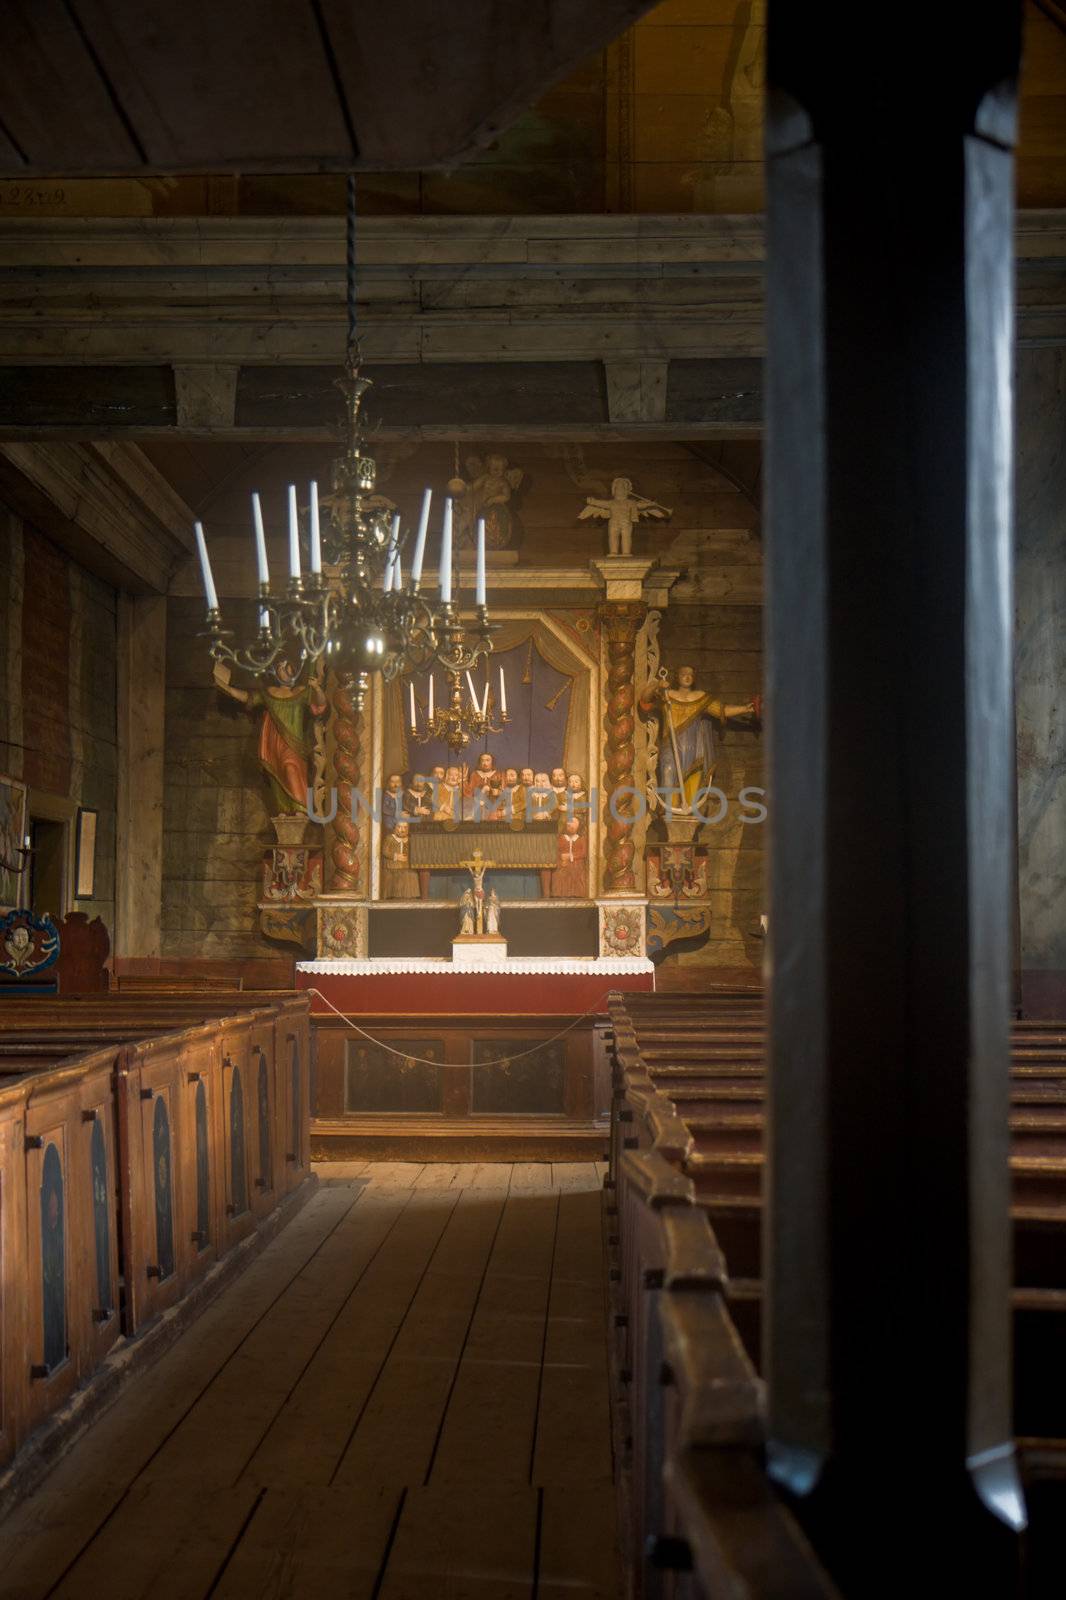 Interior of a traditional wooden church
